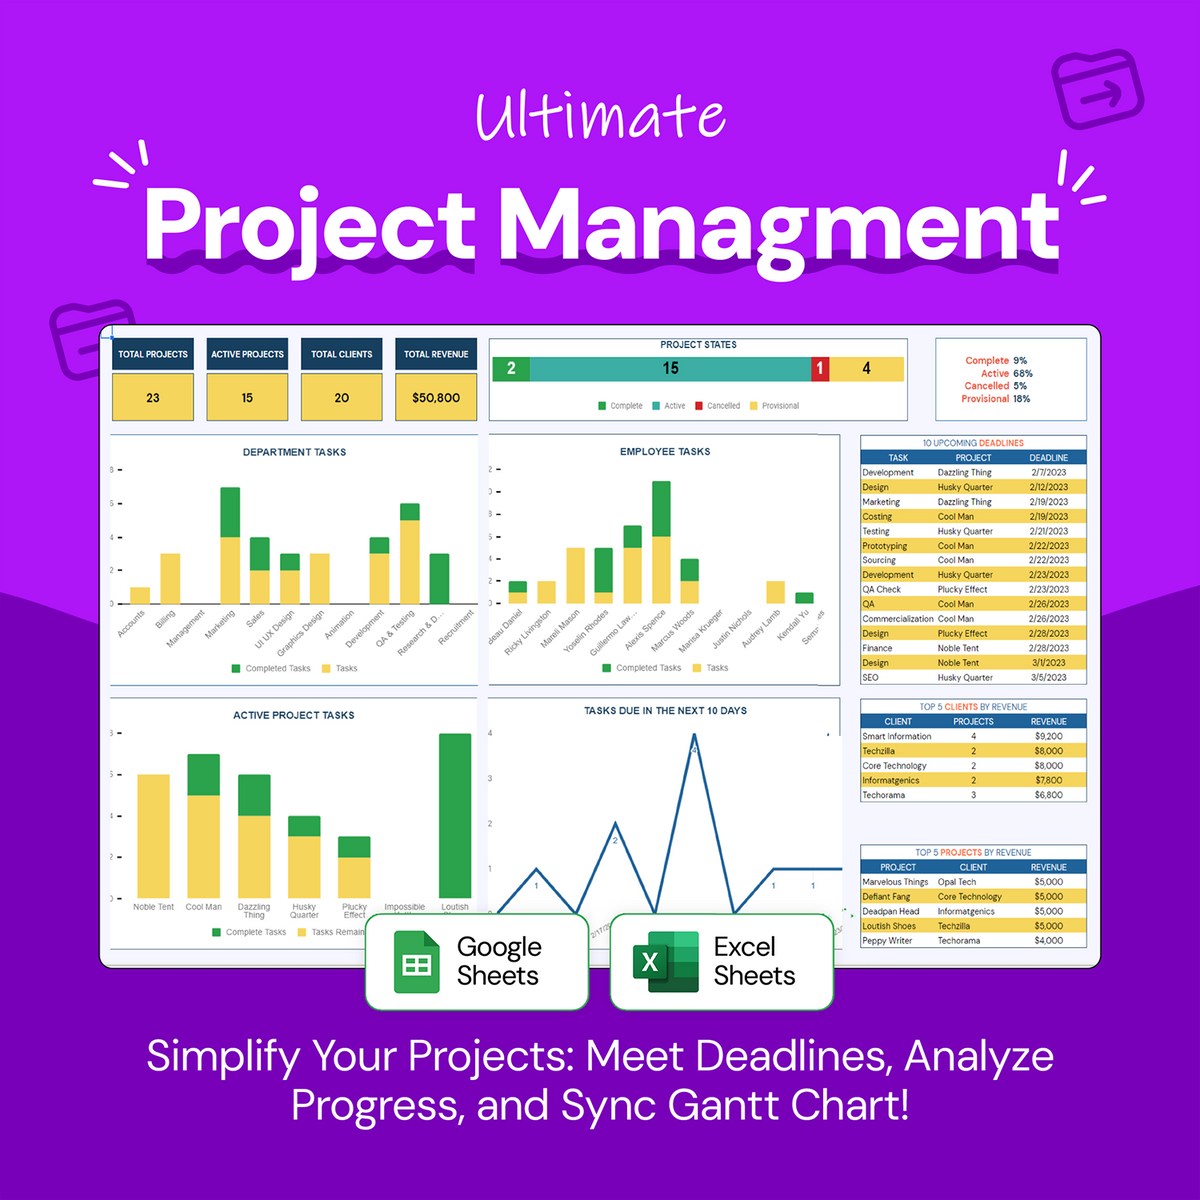 Projects Manager's Toolkit 5in1 Pack